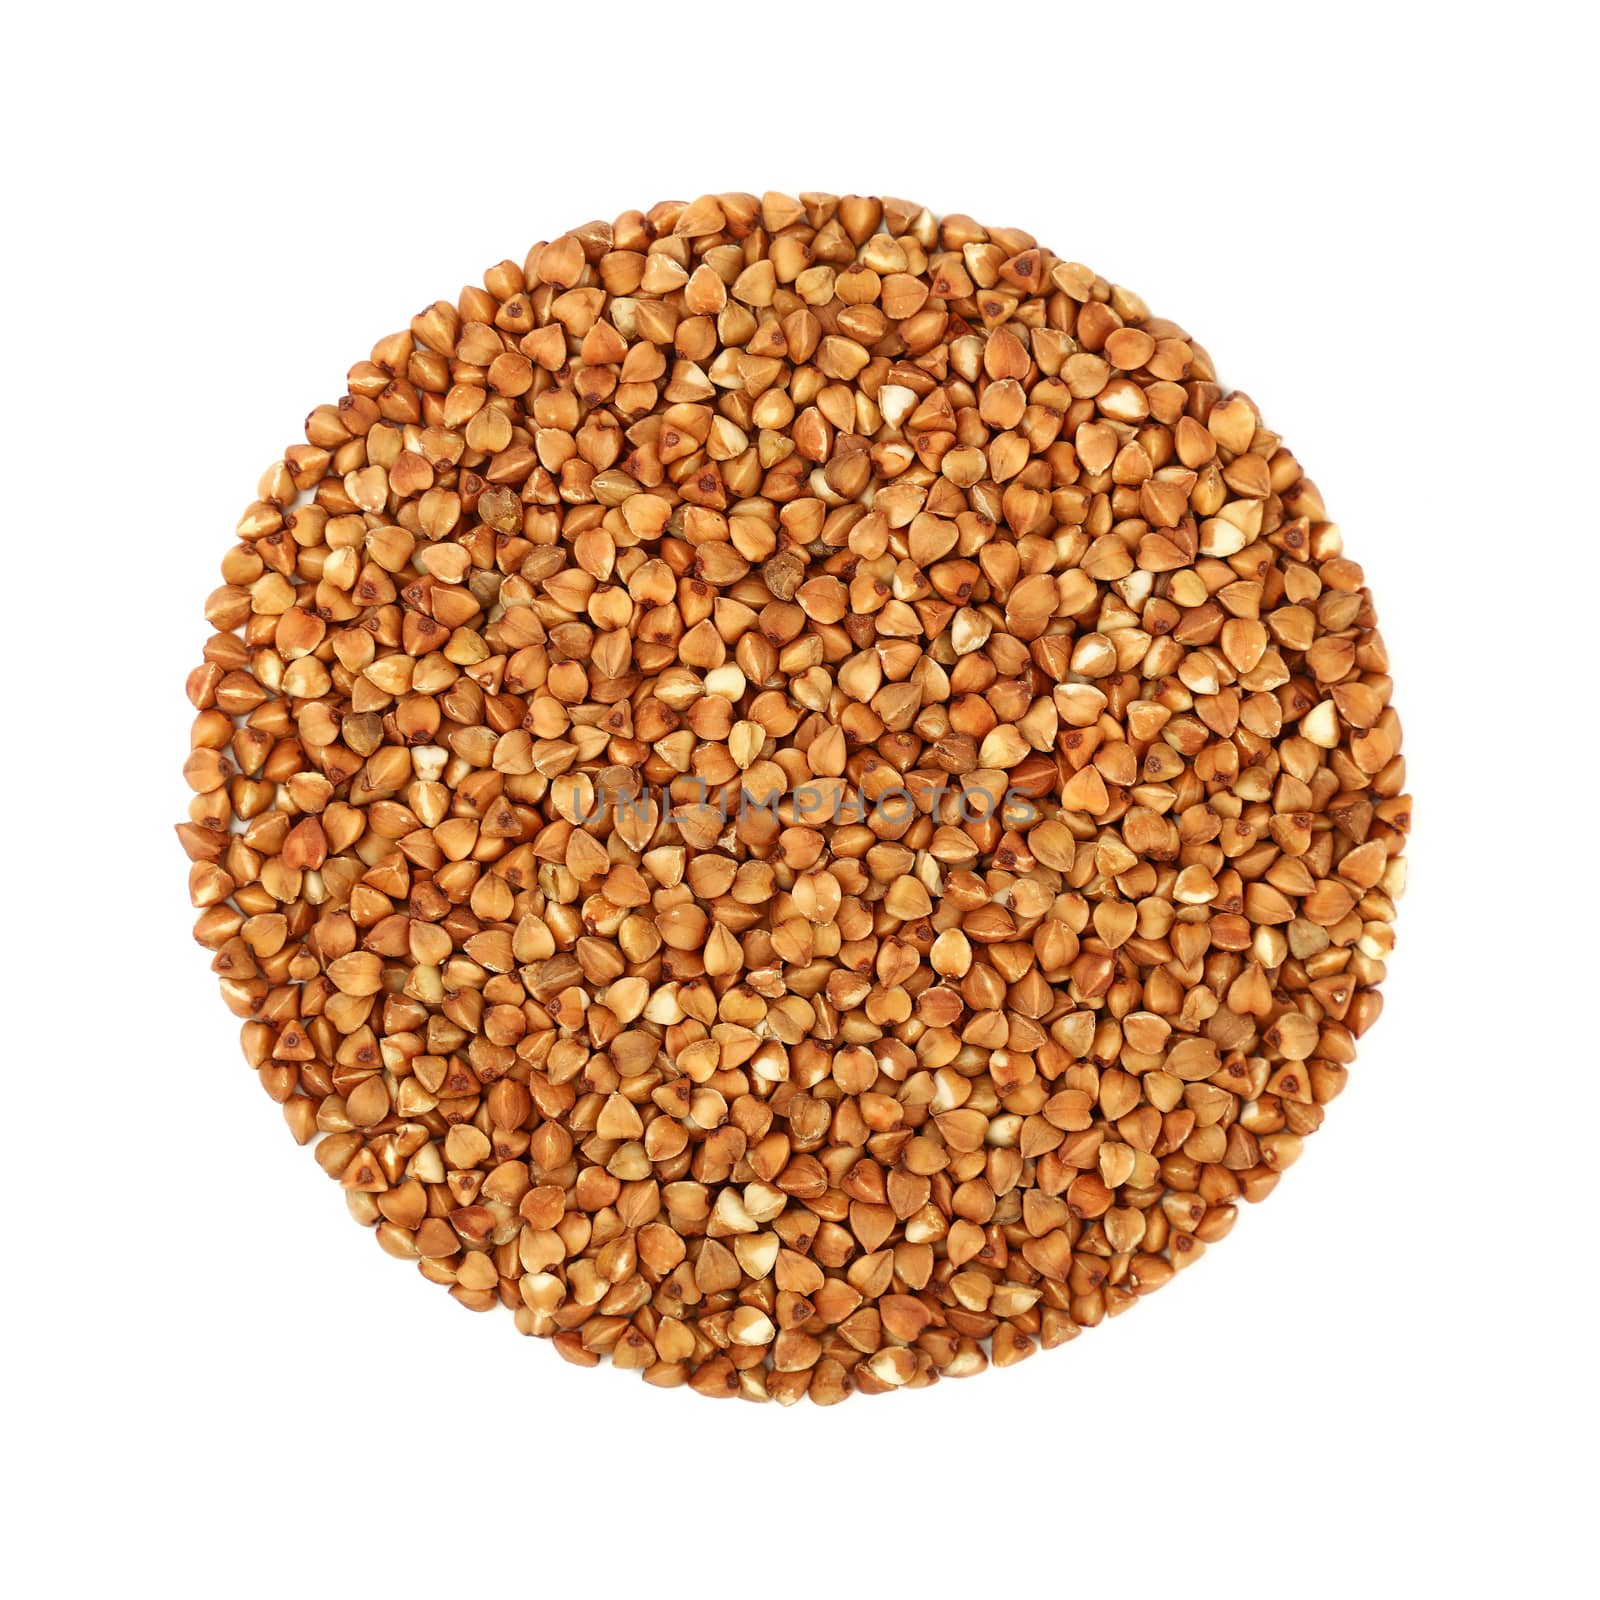 Round shaped dried brown buckwheat (Fagopyrum esculentum) groats isolated on white background, close up, elevated top view